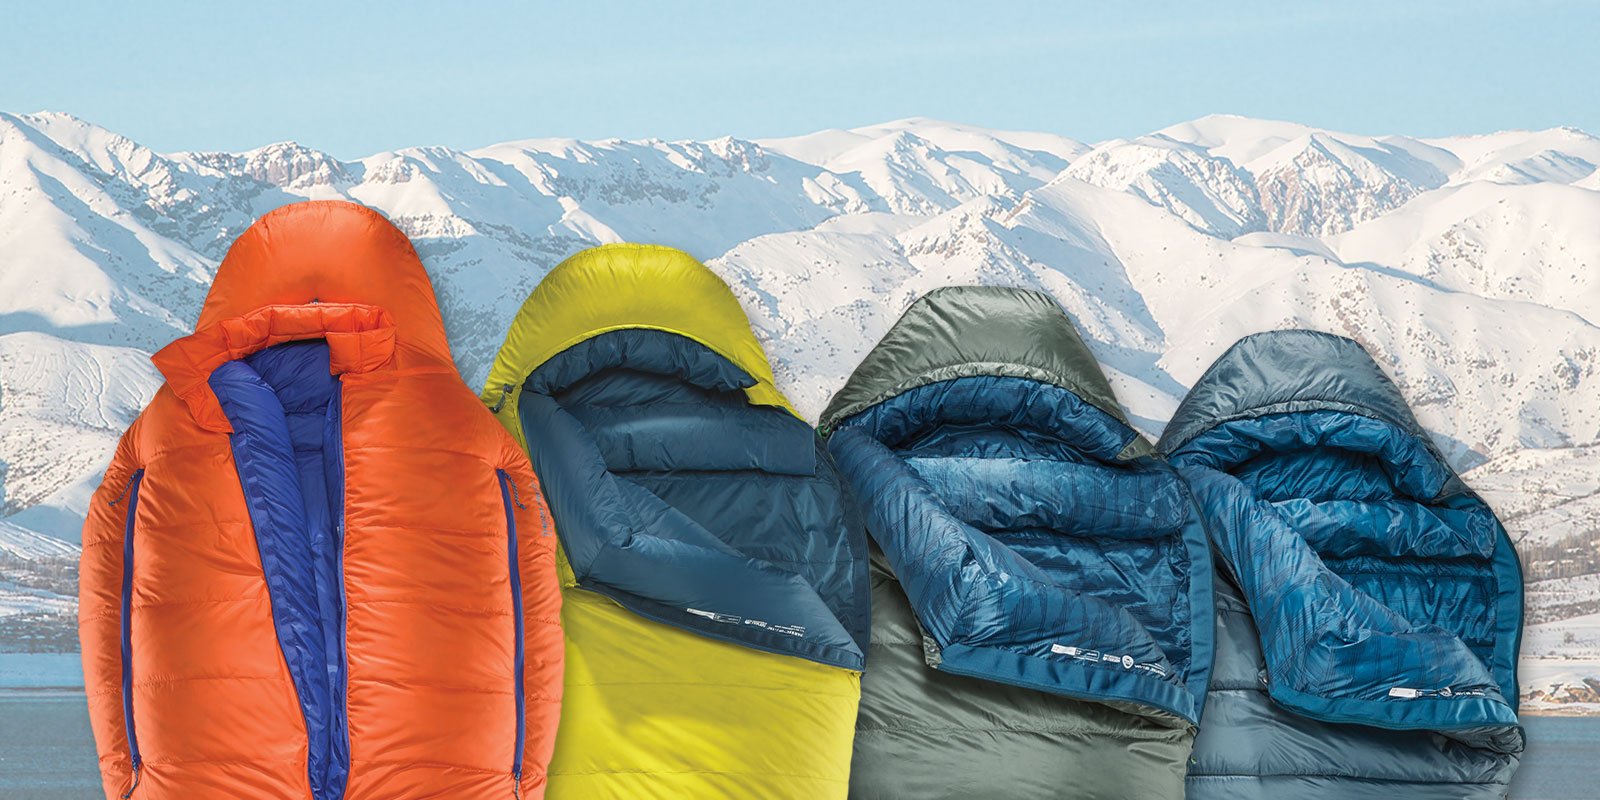 4 Sleeping bags over a snowy mountain background